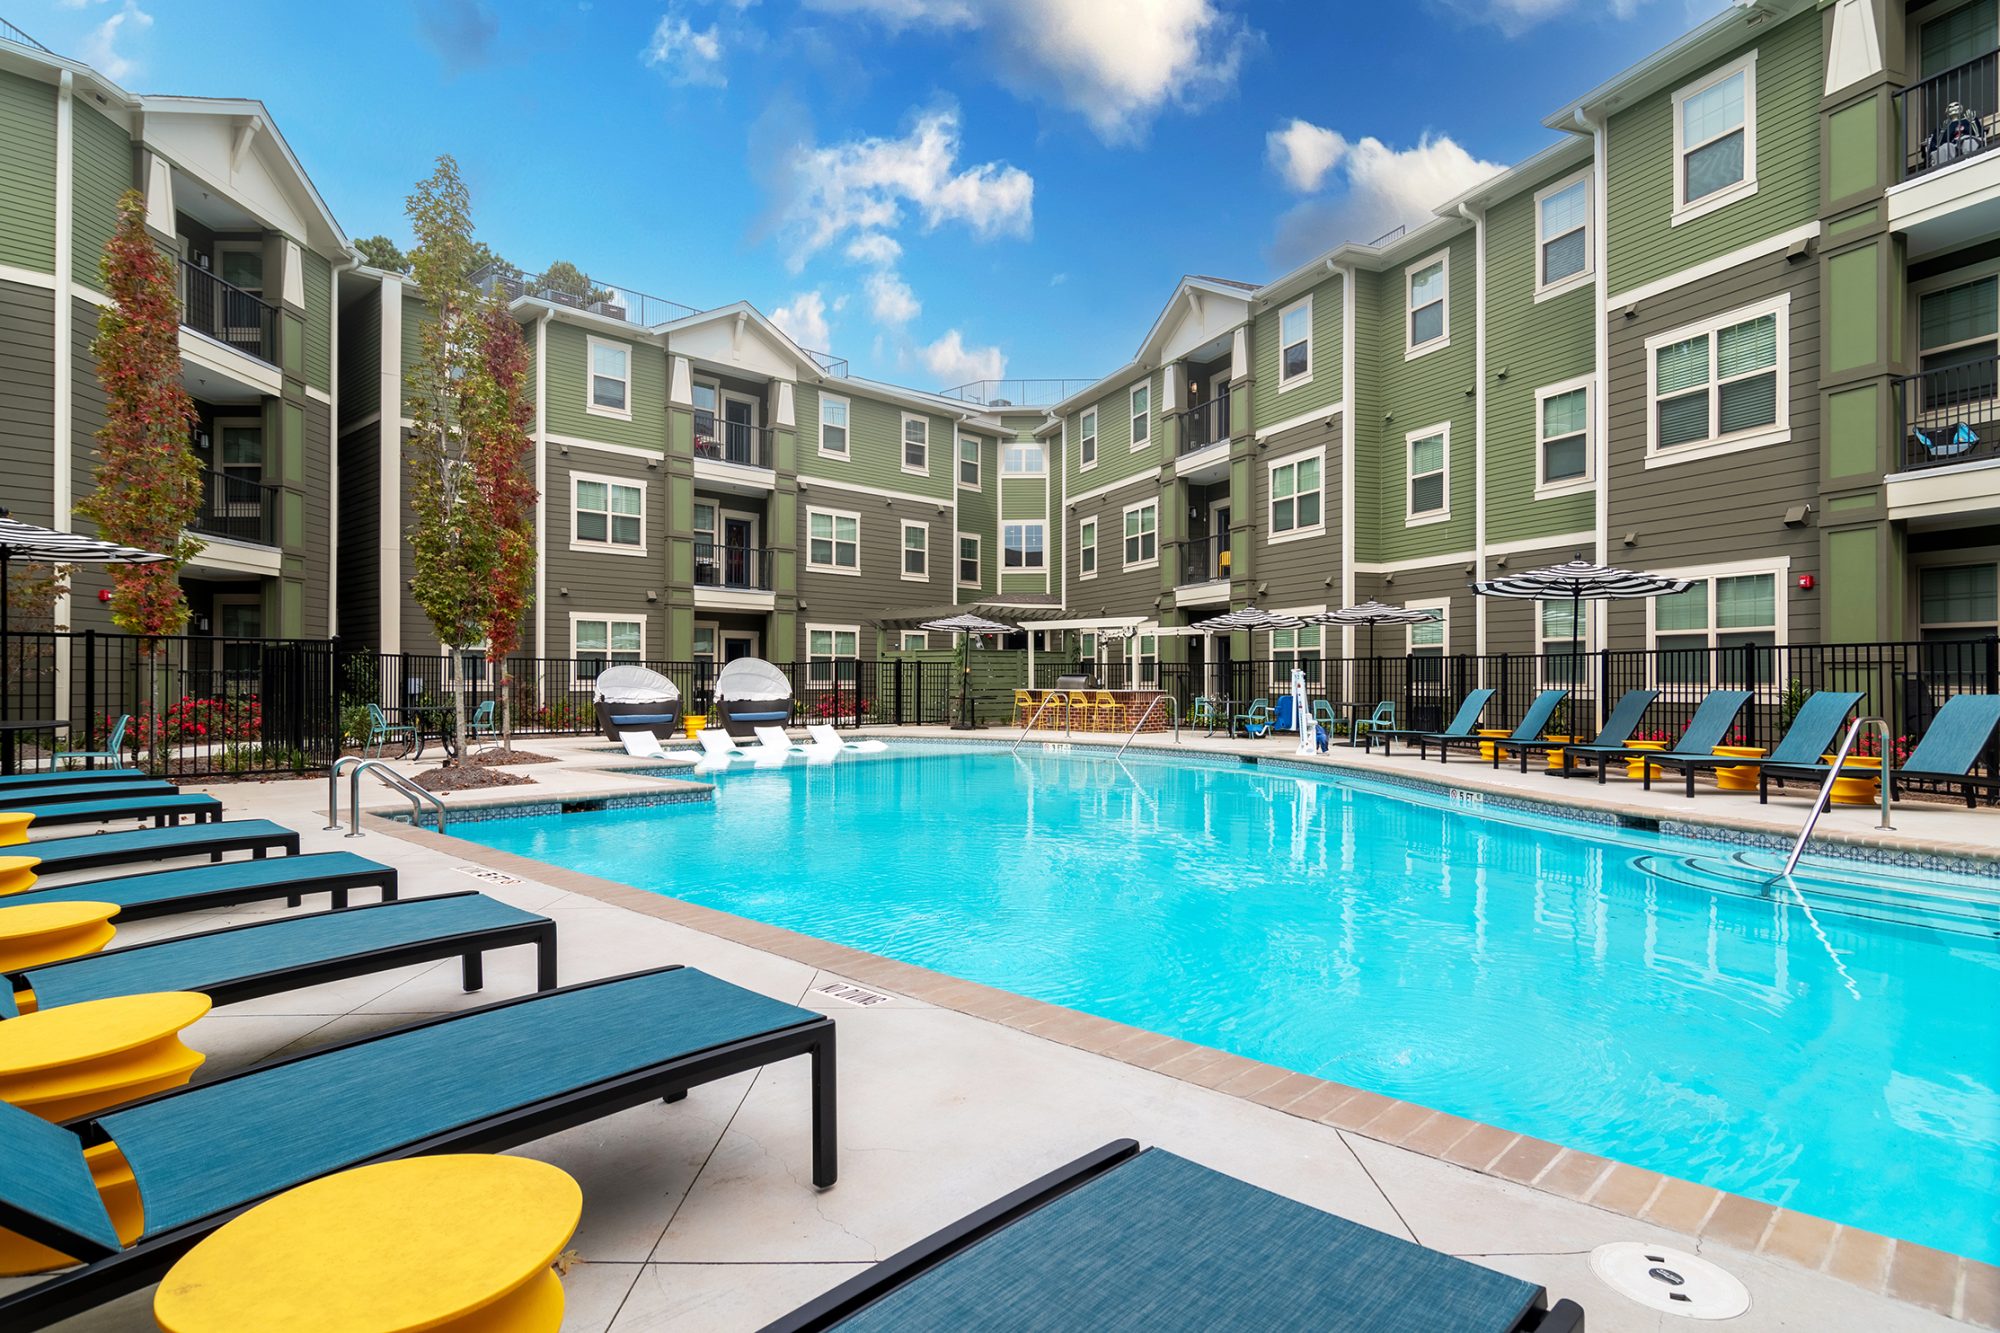 14 sixtyfive off campus apartments near kennesaw state university resort style pool lounge and tanning deck